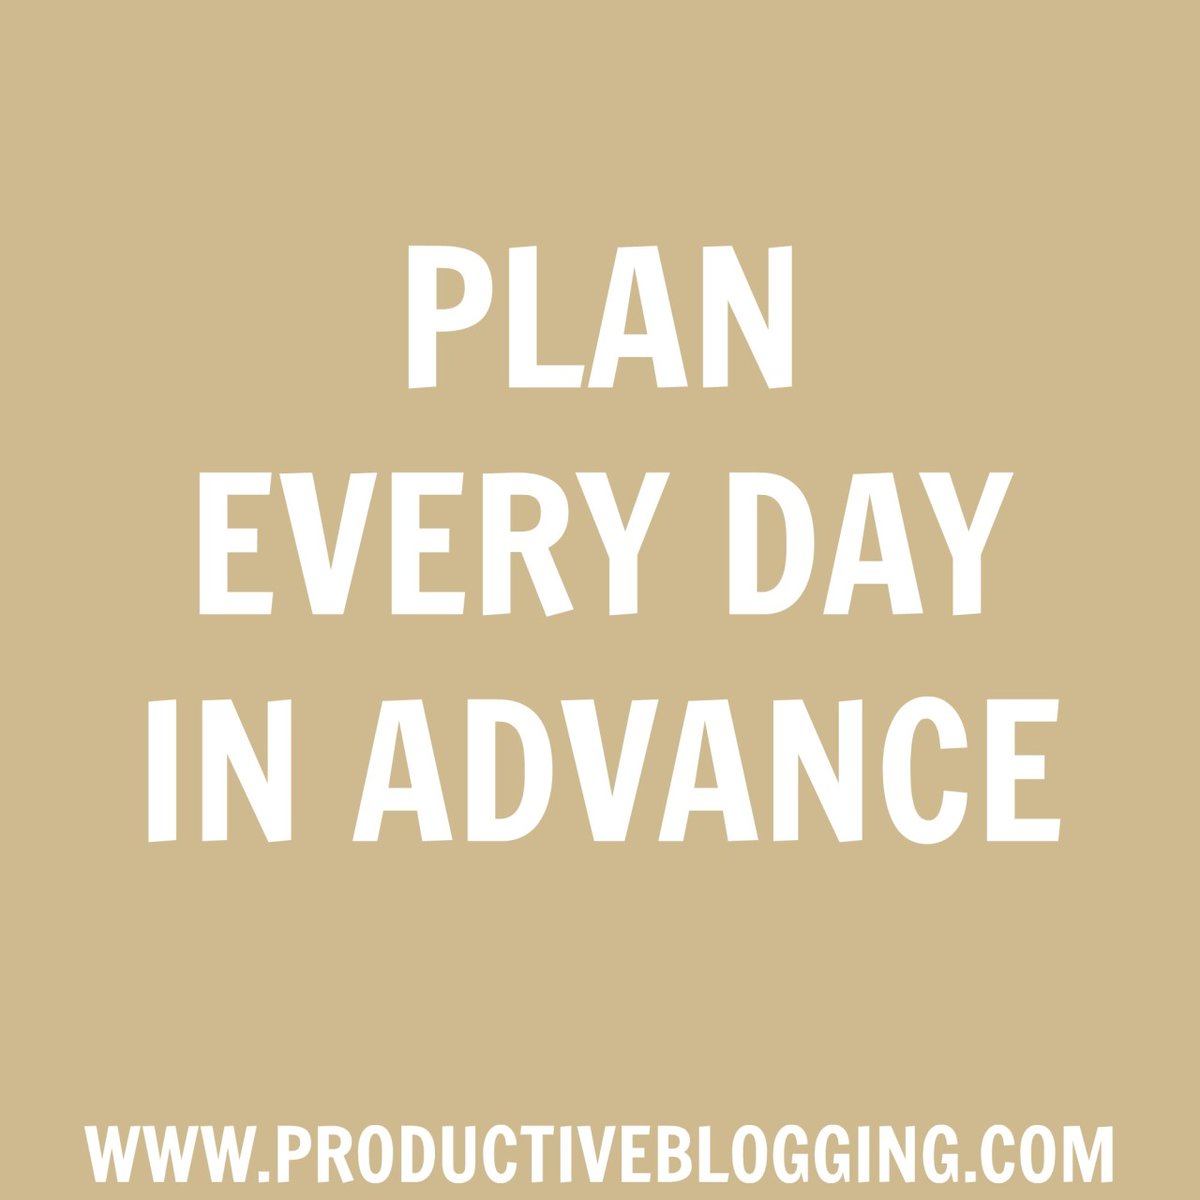 Want to know one of my biggest #productivitytips? . I write my #dailytodolist THE NIGHT BEFORE - this has THREE huge benefits: I stop work earlier, I sleep better, I hit the ground running the next morning. . How about you? Do you write a daily #todolist? . #productiveblogging